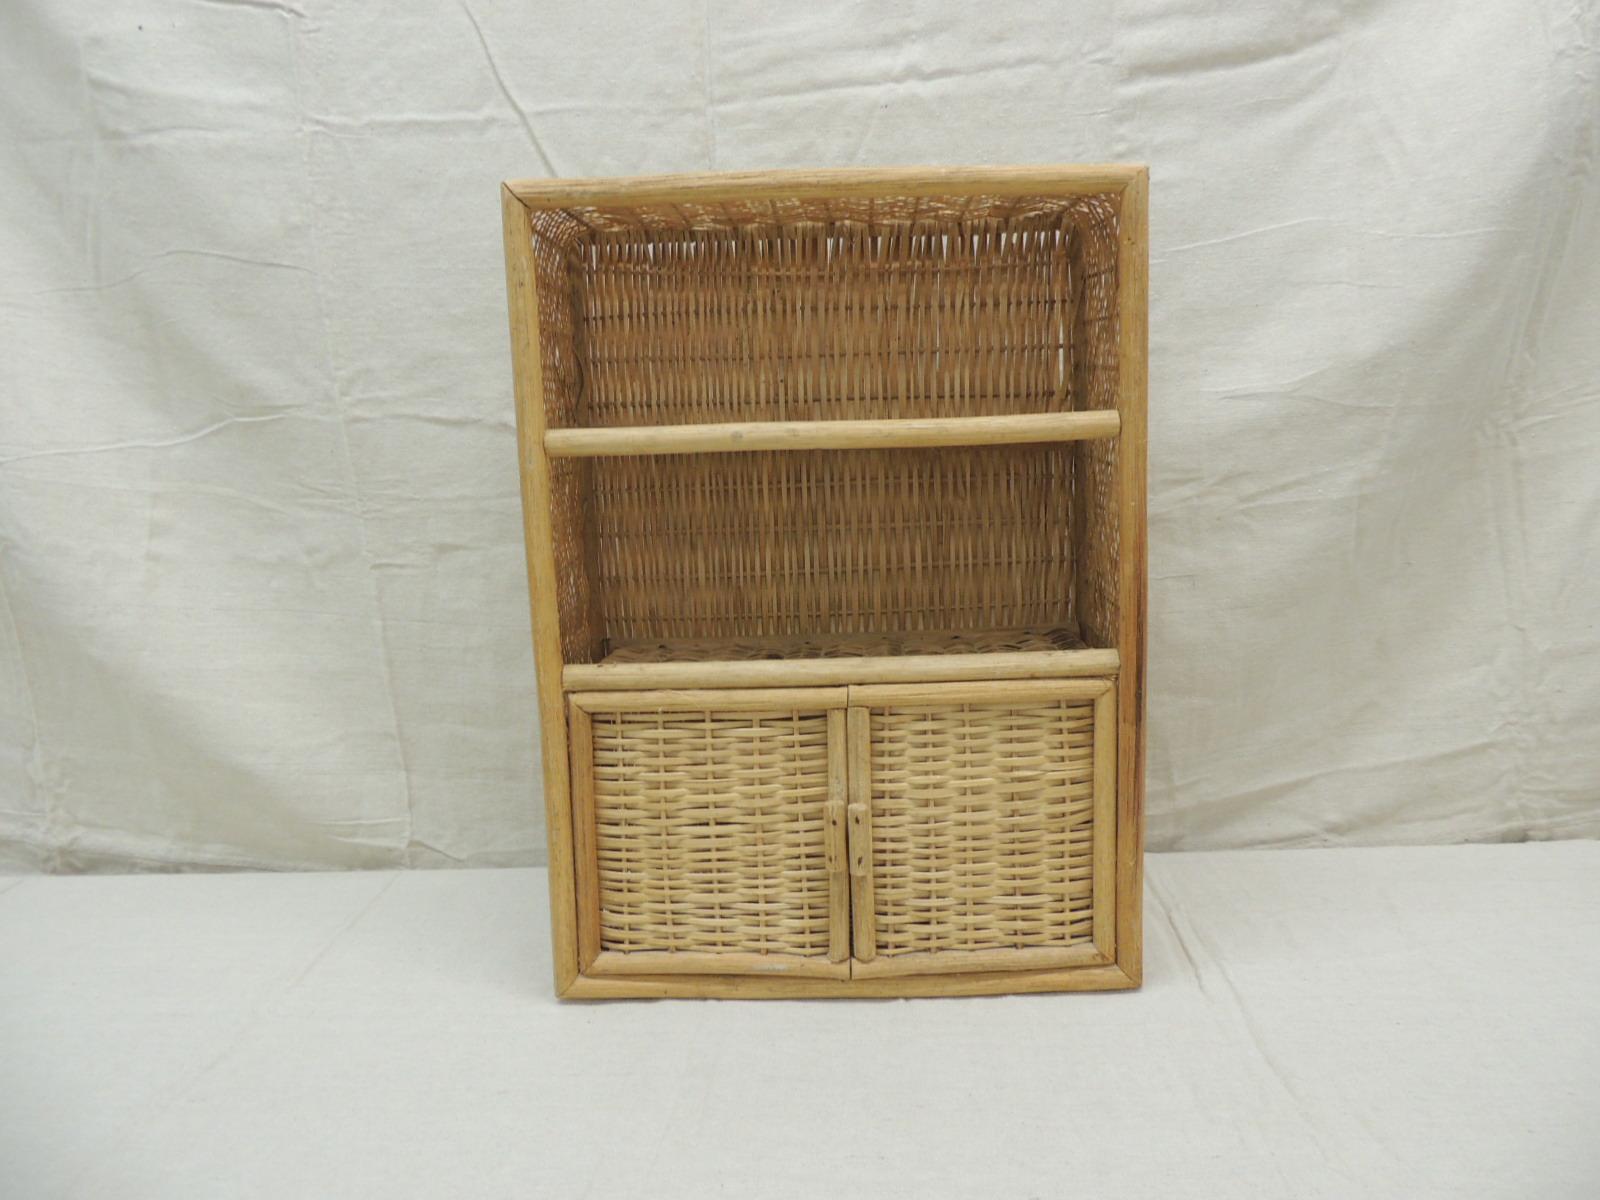 Vintage bamboo and rattan wall shelves with 2 front doors
Last shelf has a couple of hinged doors. Ideal as a medicine cabinet, altar or mini cabinet de curiosités. Two hanging hooks made of rattan and finished in all sides. Perfect for your new